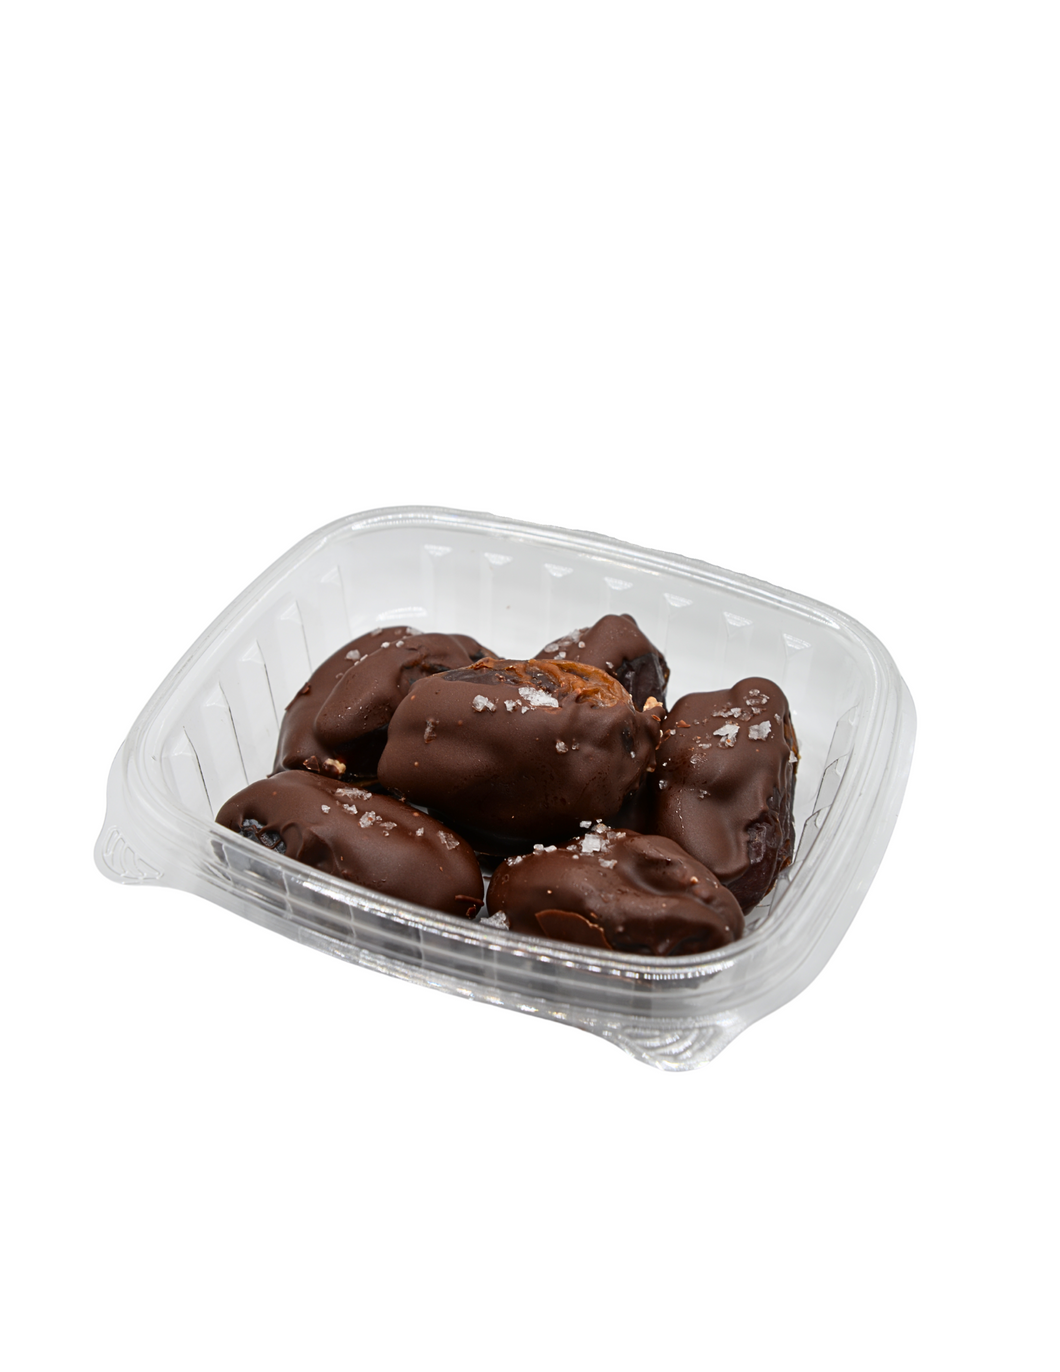 Molly's Chocolate Covered Almond Butter Dates